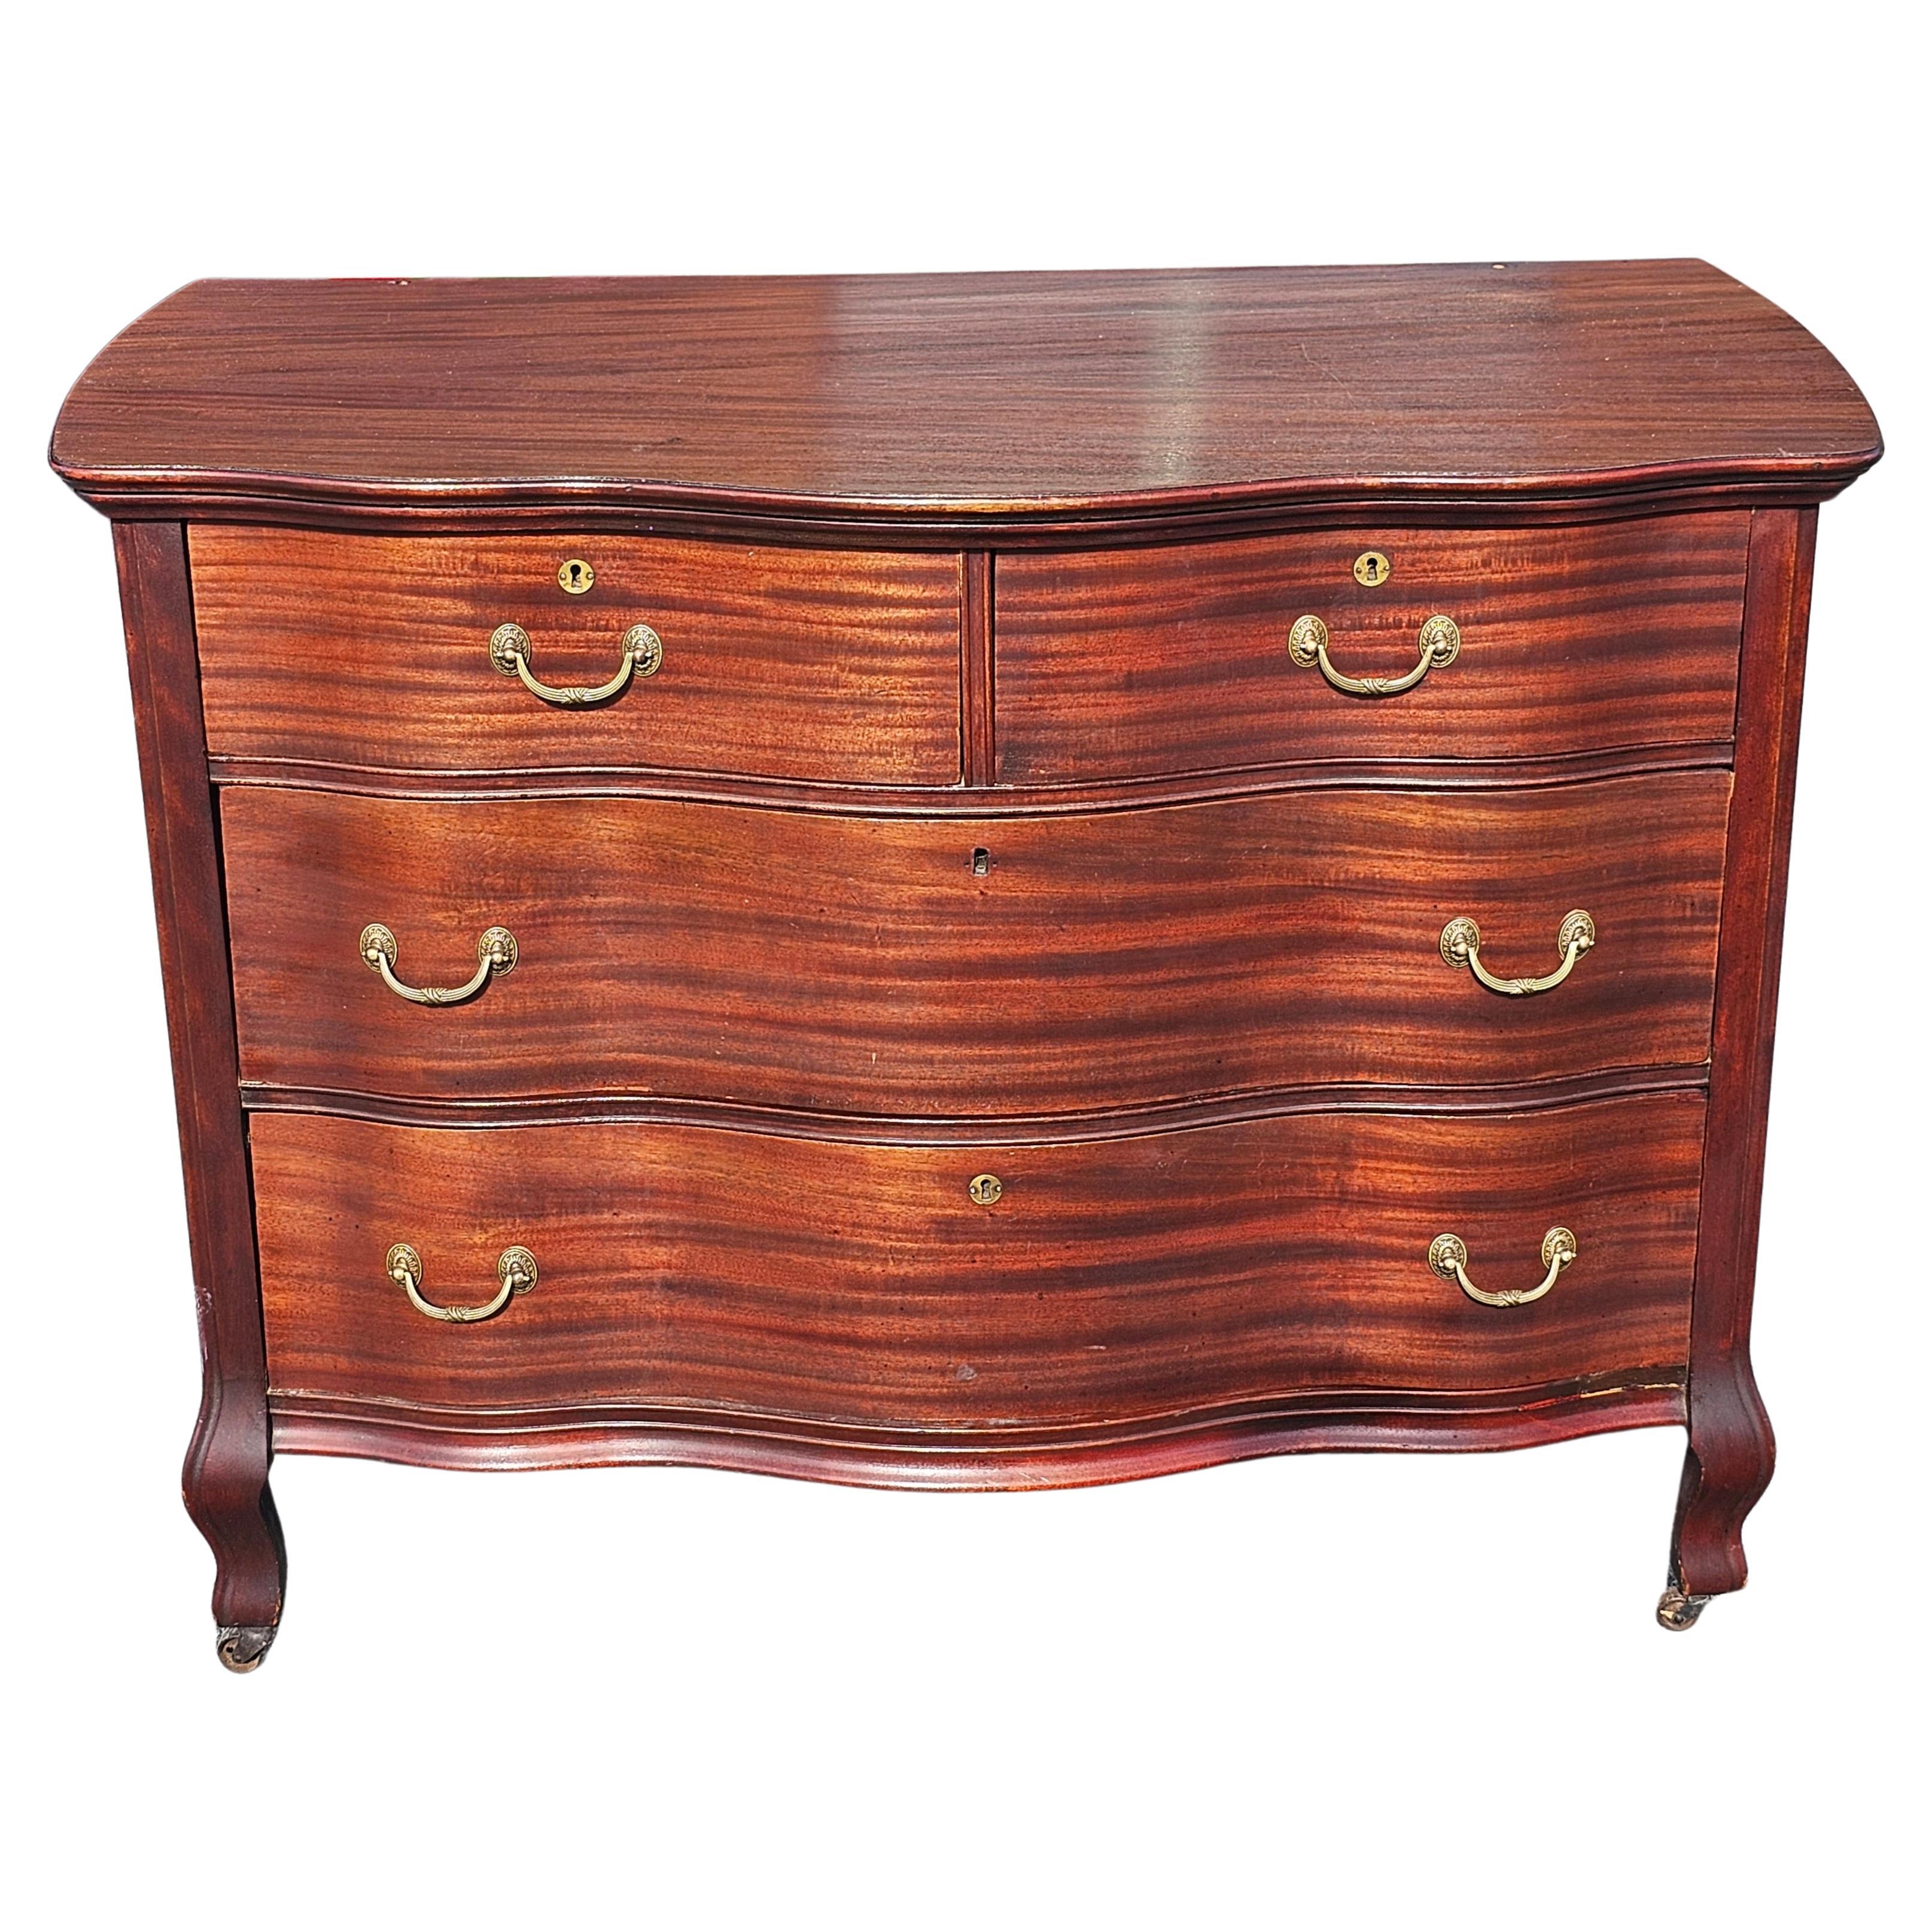 Early 20th Century Widdicomd Tiger Mahogany Serpentine Commode Chest on Wheels For Sale